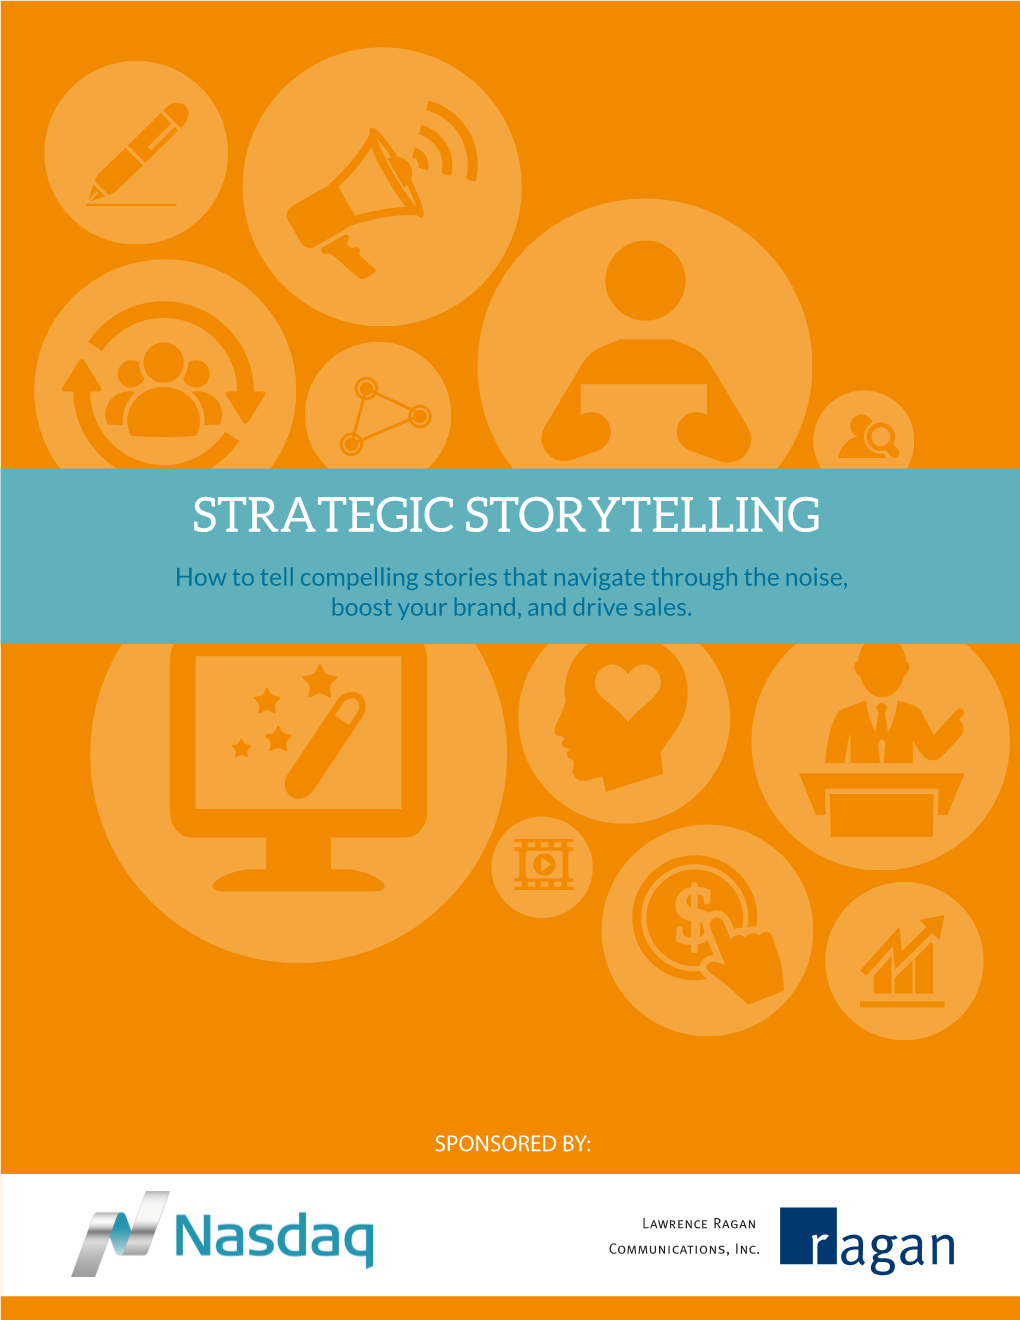 STRATEGIC STORYTELLING How to Tell Compelling Stories That Navigate Through the Noise, Boost Your Brand, and Drive Sales